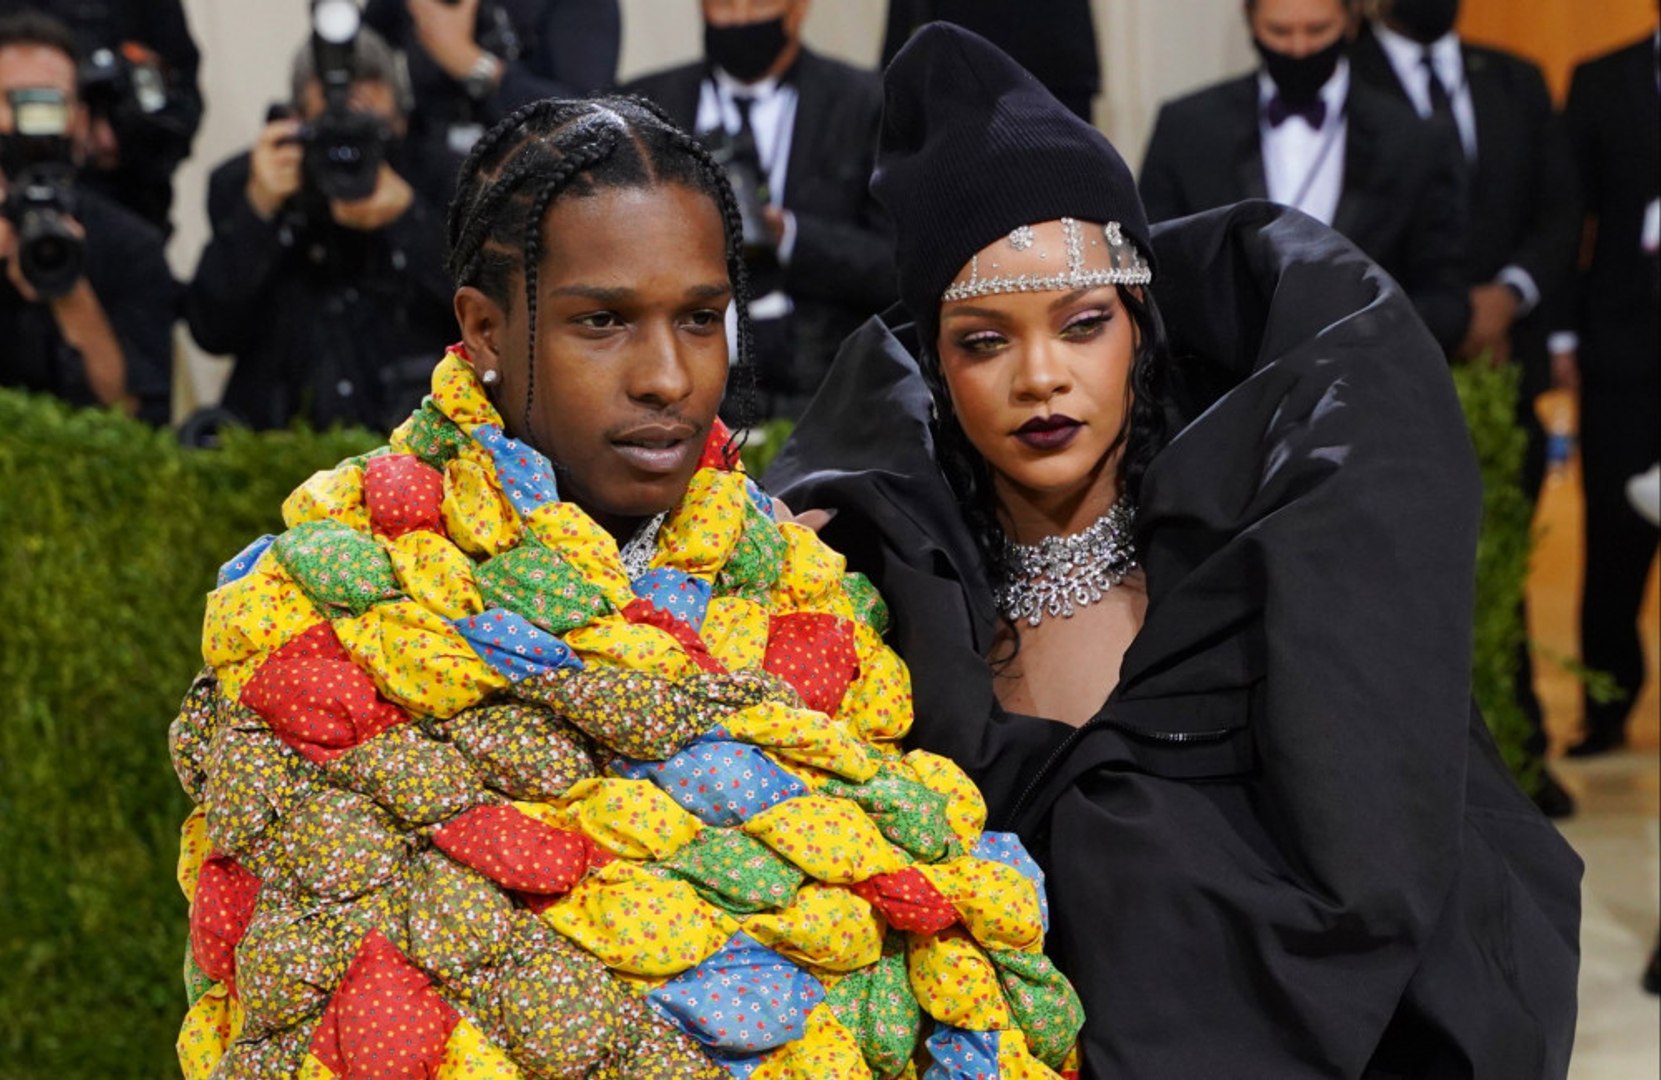 You Can Freak TF Out Now: Rihanna Is Expecting Her First Child With  Boyfriend A$AP Rocky (!!!!)